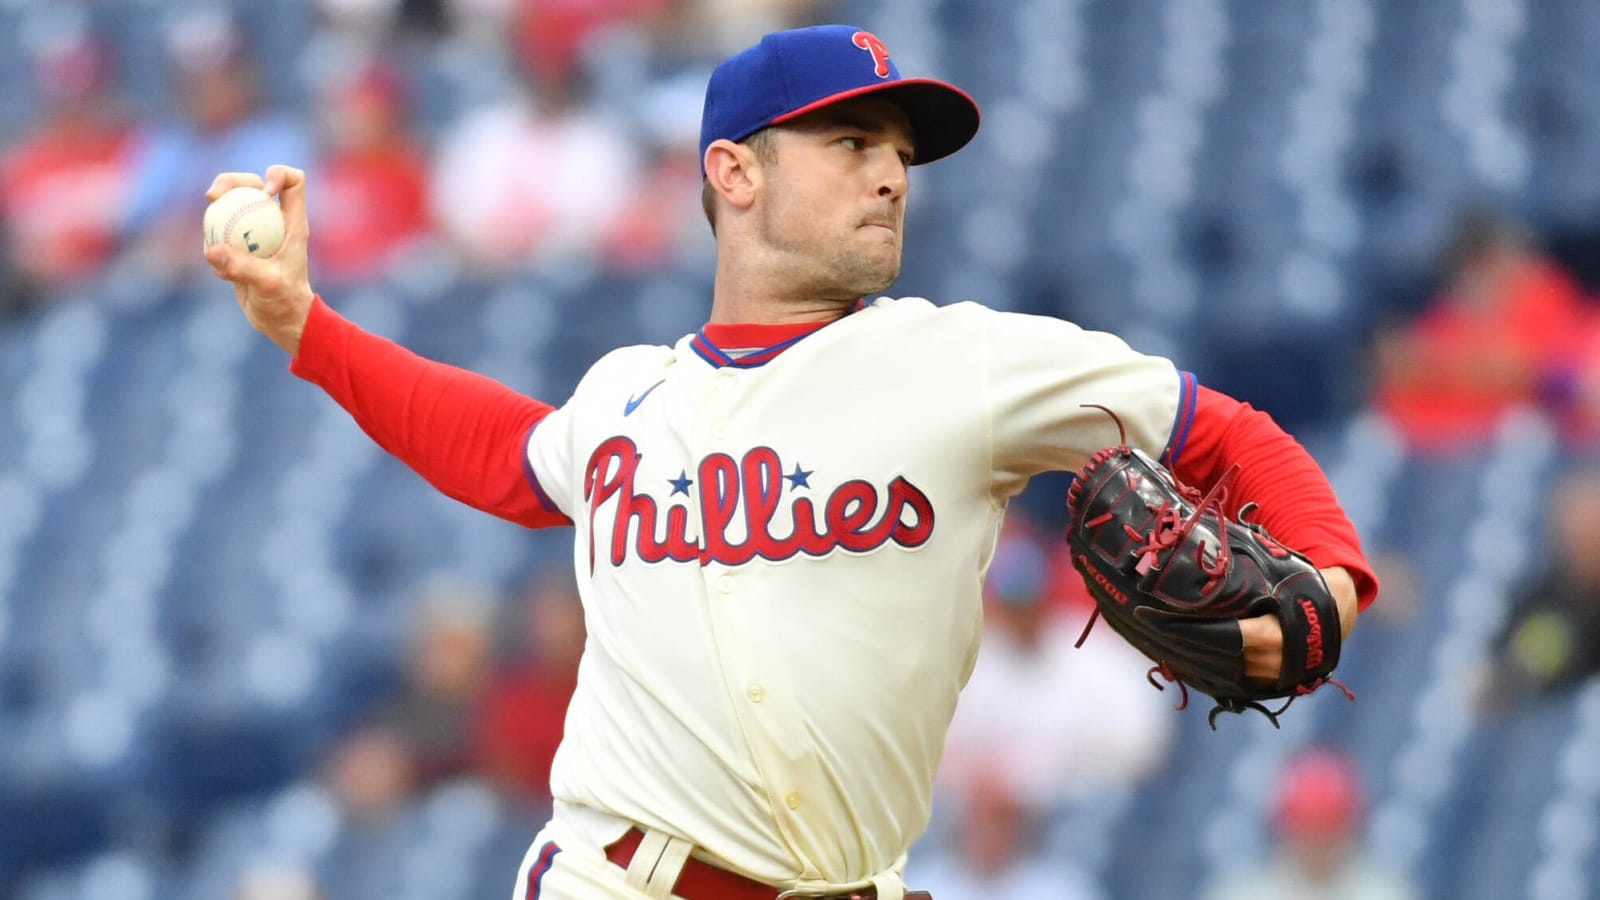 Report: Phillies reliever David Robertson hoping to return for NLCS matchup